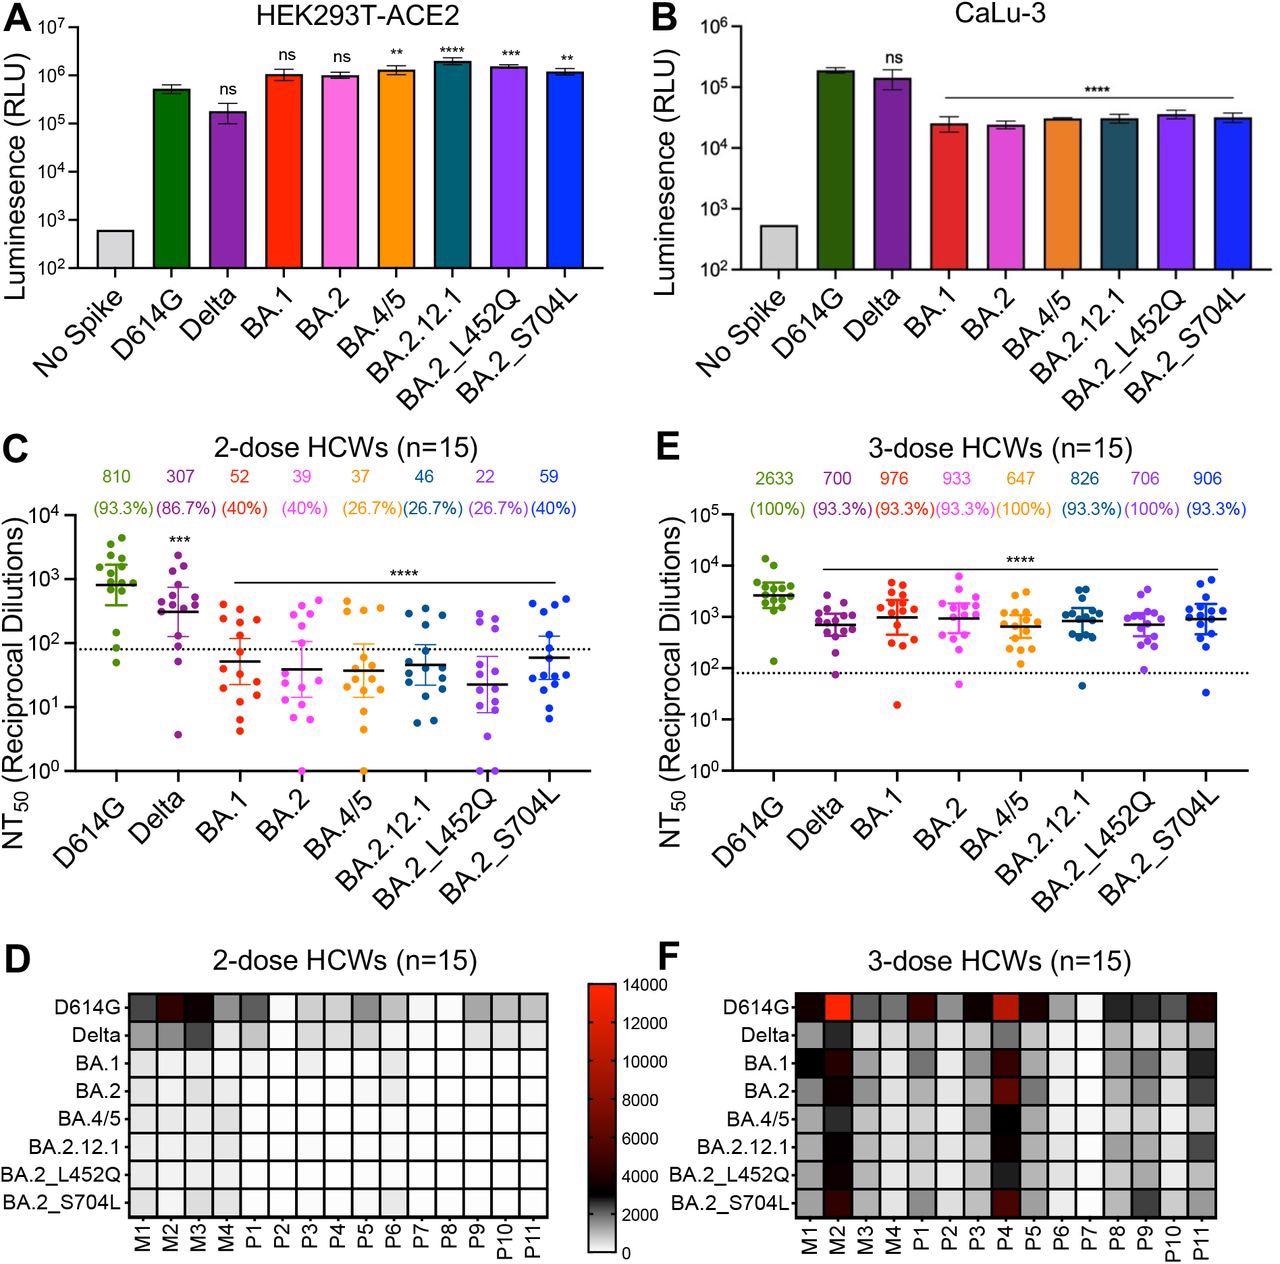 BA.4/5 and BA.2.12.1 subvariants exhibit stronger immune escape than BA.1 and BA.2. (A) Infectivity of pseudotyped viruses in HEK293T cells stably expressing ACE2 (HEK293T-ACE2). (B) Infectivity of pseudotyped lentivirus in human lung epithelia-derived CaLu-3 cells. Bars in (A) and (B) represent means ± standard deviation, and significance is determined by one-way repeated measures ANOVA with Bonferroni’s multiple testing correction. Results of at least 3 independent experiments are averaged and shown. (C) Sera from 15 HCWs collected 3-4 weeks after second mRNA vaccine dose was used to neutralize pseudotyped virus, and the resulting geometric means of the 50% neutralization titers (NT50) are displayed at the top of the graph along with the percent of individuals with NT50 values above the limit of detection (NT50 = 80; dotted line). (D) A heat map showing patient/vaccinee NT50 values against each variant for the 2-dose HCW sera. (E) Sera from 15 HCWs following homologous mRNA booster vaccination were assessed for nAb titers. Bars in (C) and (E) represent geometric mean ± 95% confidence interval, and significance relative to D614G is determined by one-way repeated measures ANOVA with Bonferroni’s multiple testing correction. (F) A heat map showing patient/vaccinee NT50 values against each variant for the 3-dose HCW sera. Patient/vaccinee numbers are identified as “P” for Pfizer/BioNTech BNT162b2 vaccinated/boosted HCW, “M” for Moderna mRNA-1273 vaccinated/boosted HCW. Throughout, p-values are represented as **p < 0.01, ***p < 0.001, ****p < 0.0001, ns, not significant.